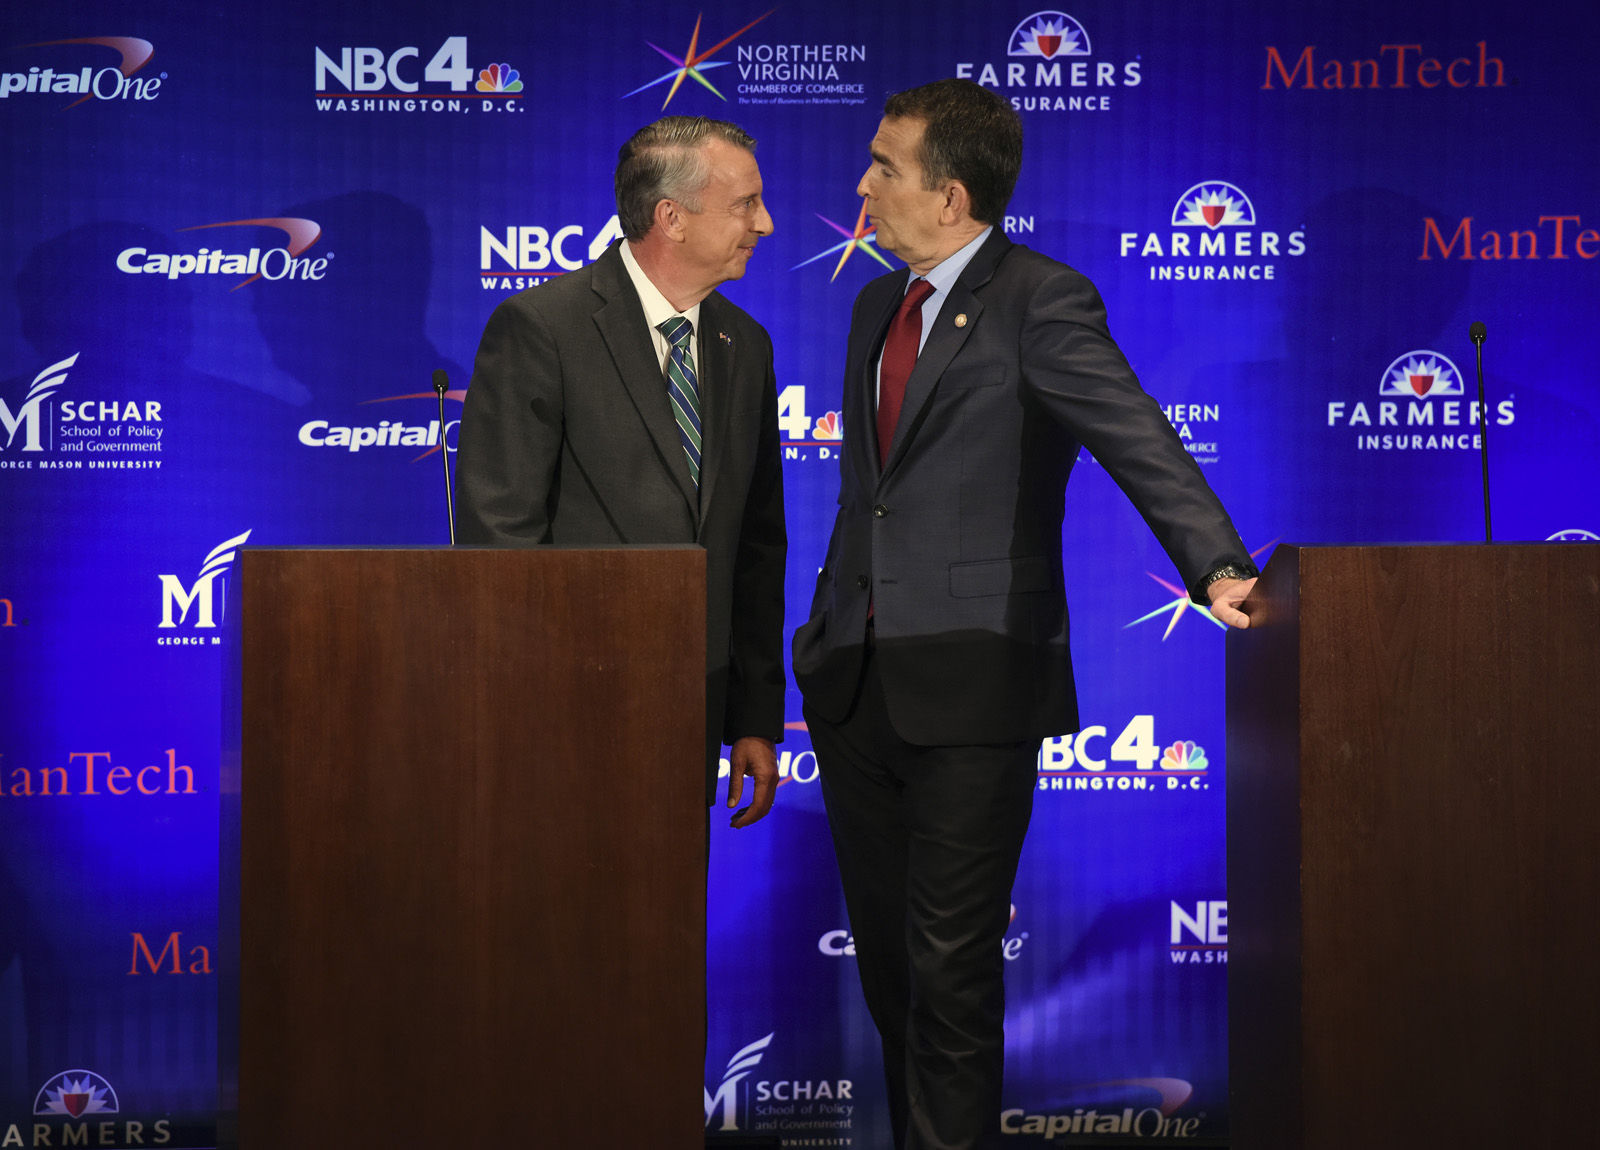 MCLEAN, VA - SEPTEMBER 19:
Republican candidate Ed Gillespie, left, and Lt. Gov. Ralph Northam, Democrat, greet each other before the start of the Gubernatorial debate on September, 19, 2017 in McLean, VA.
(Pool Photo by Bill O'Leary/The Washington Post)